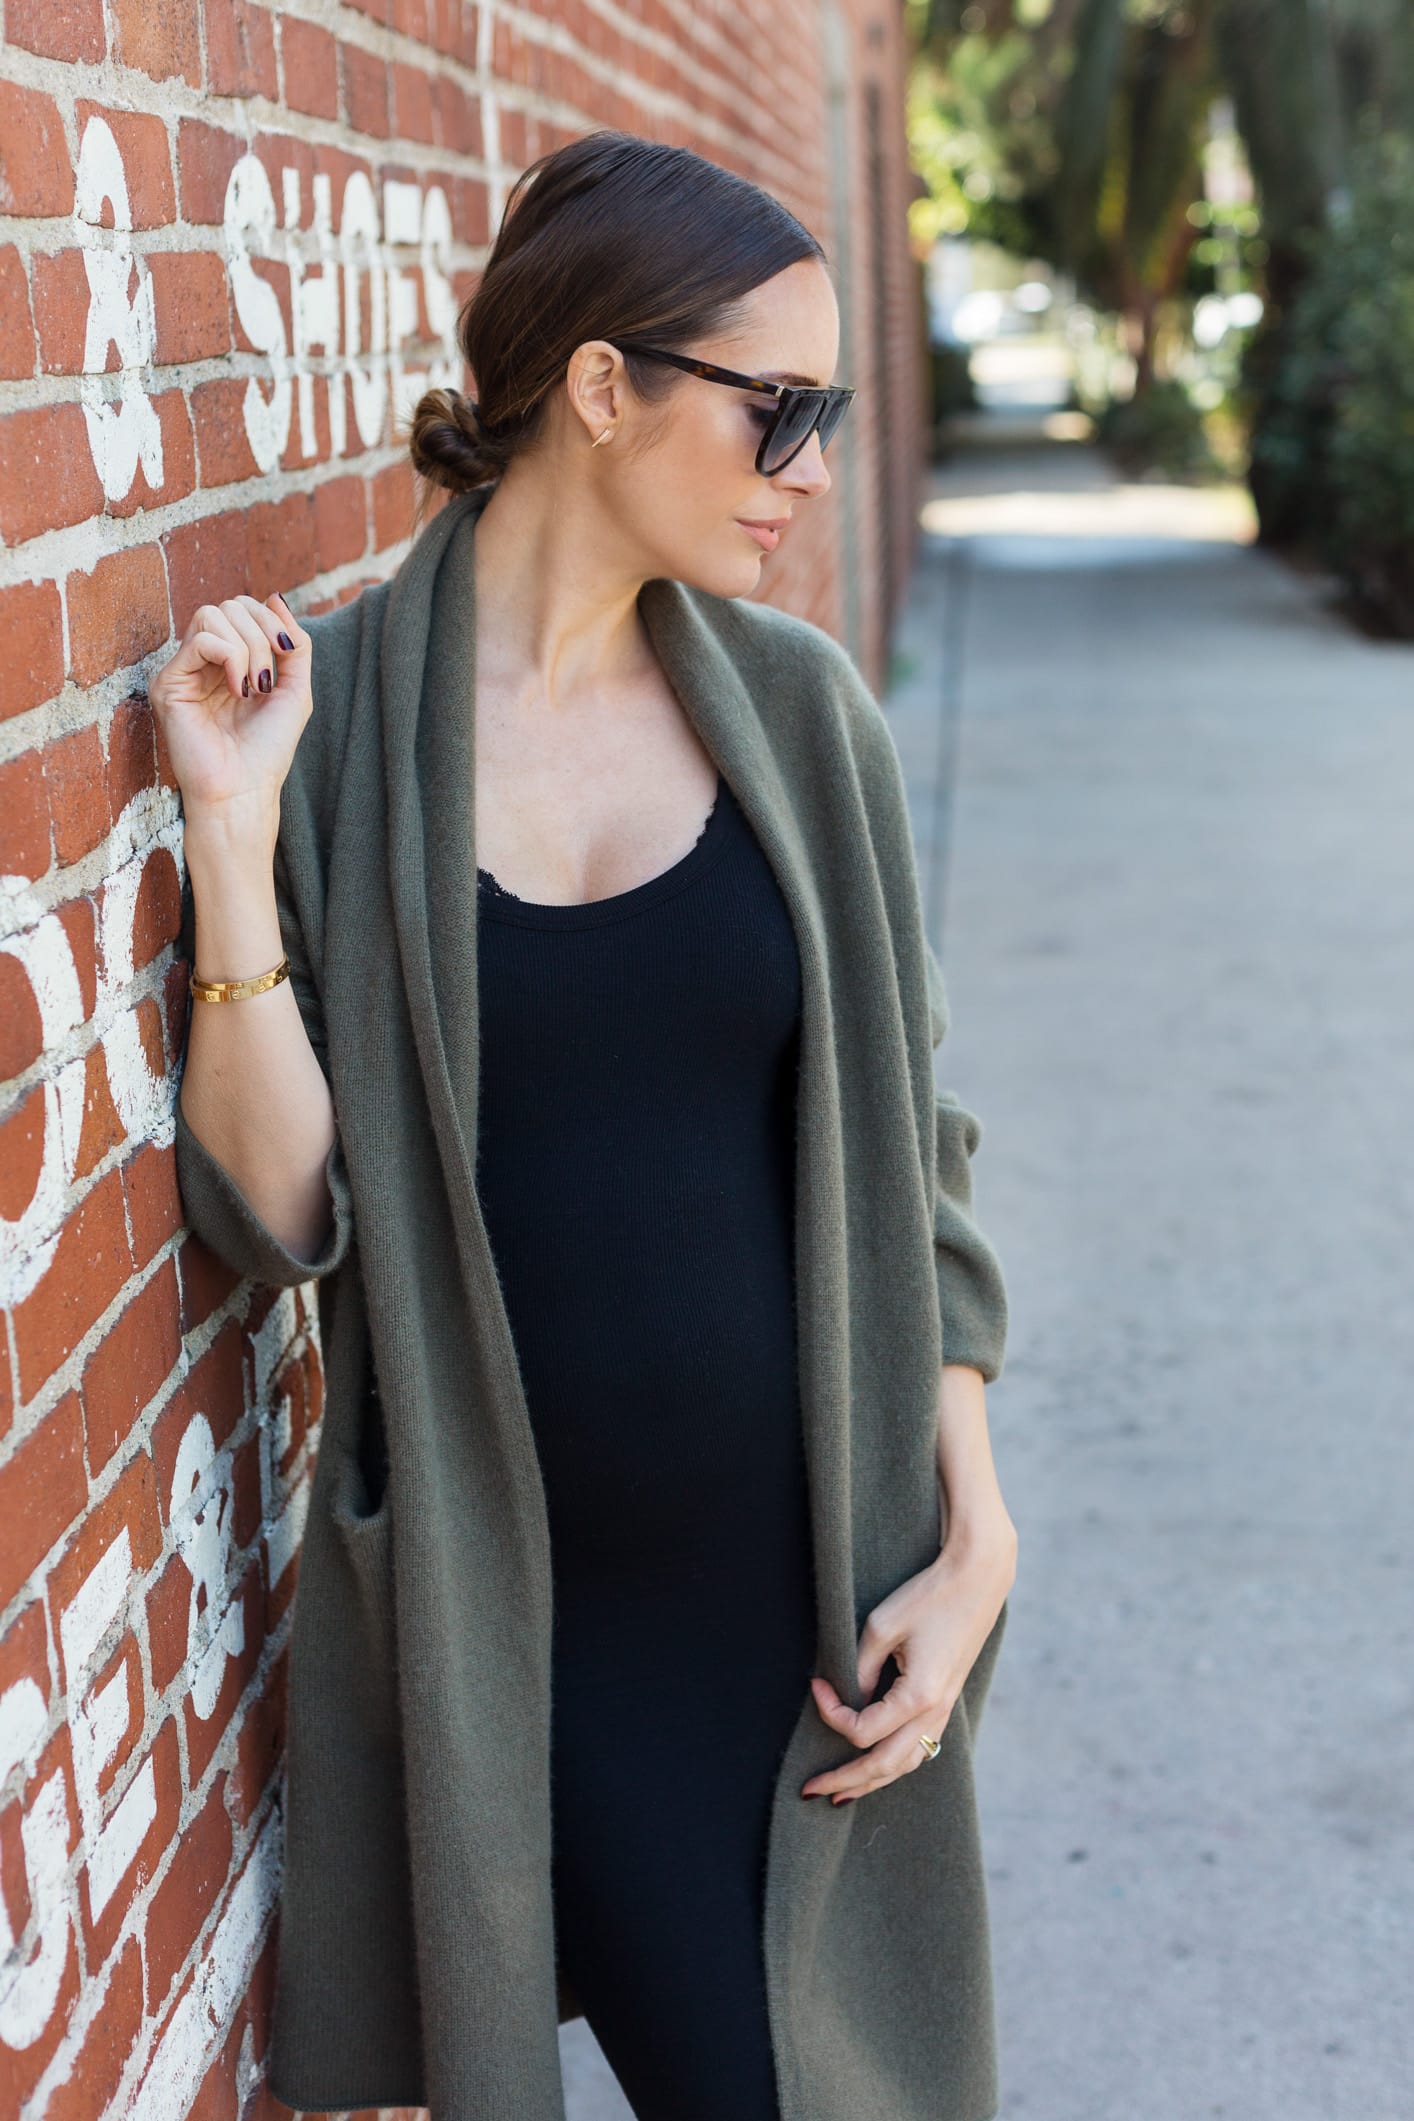 Louise Roe non maternity maternity style outfit with midi dress and cardigan